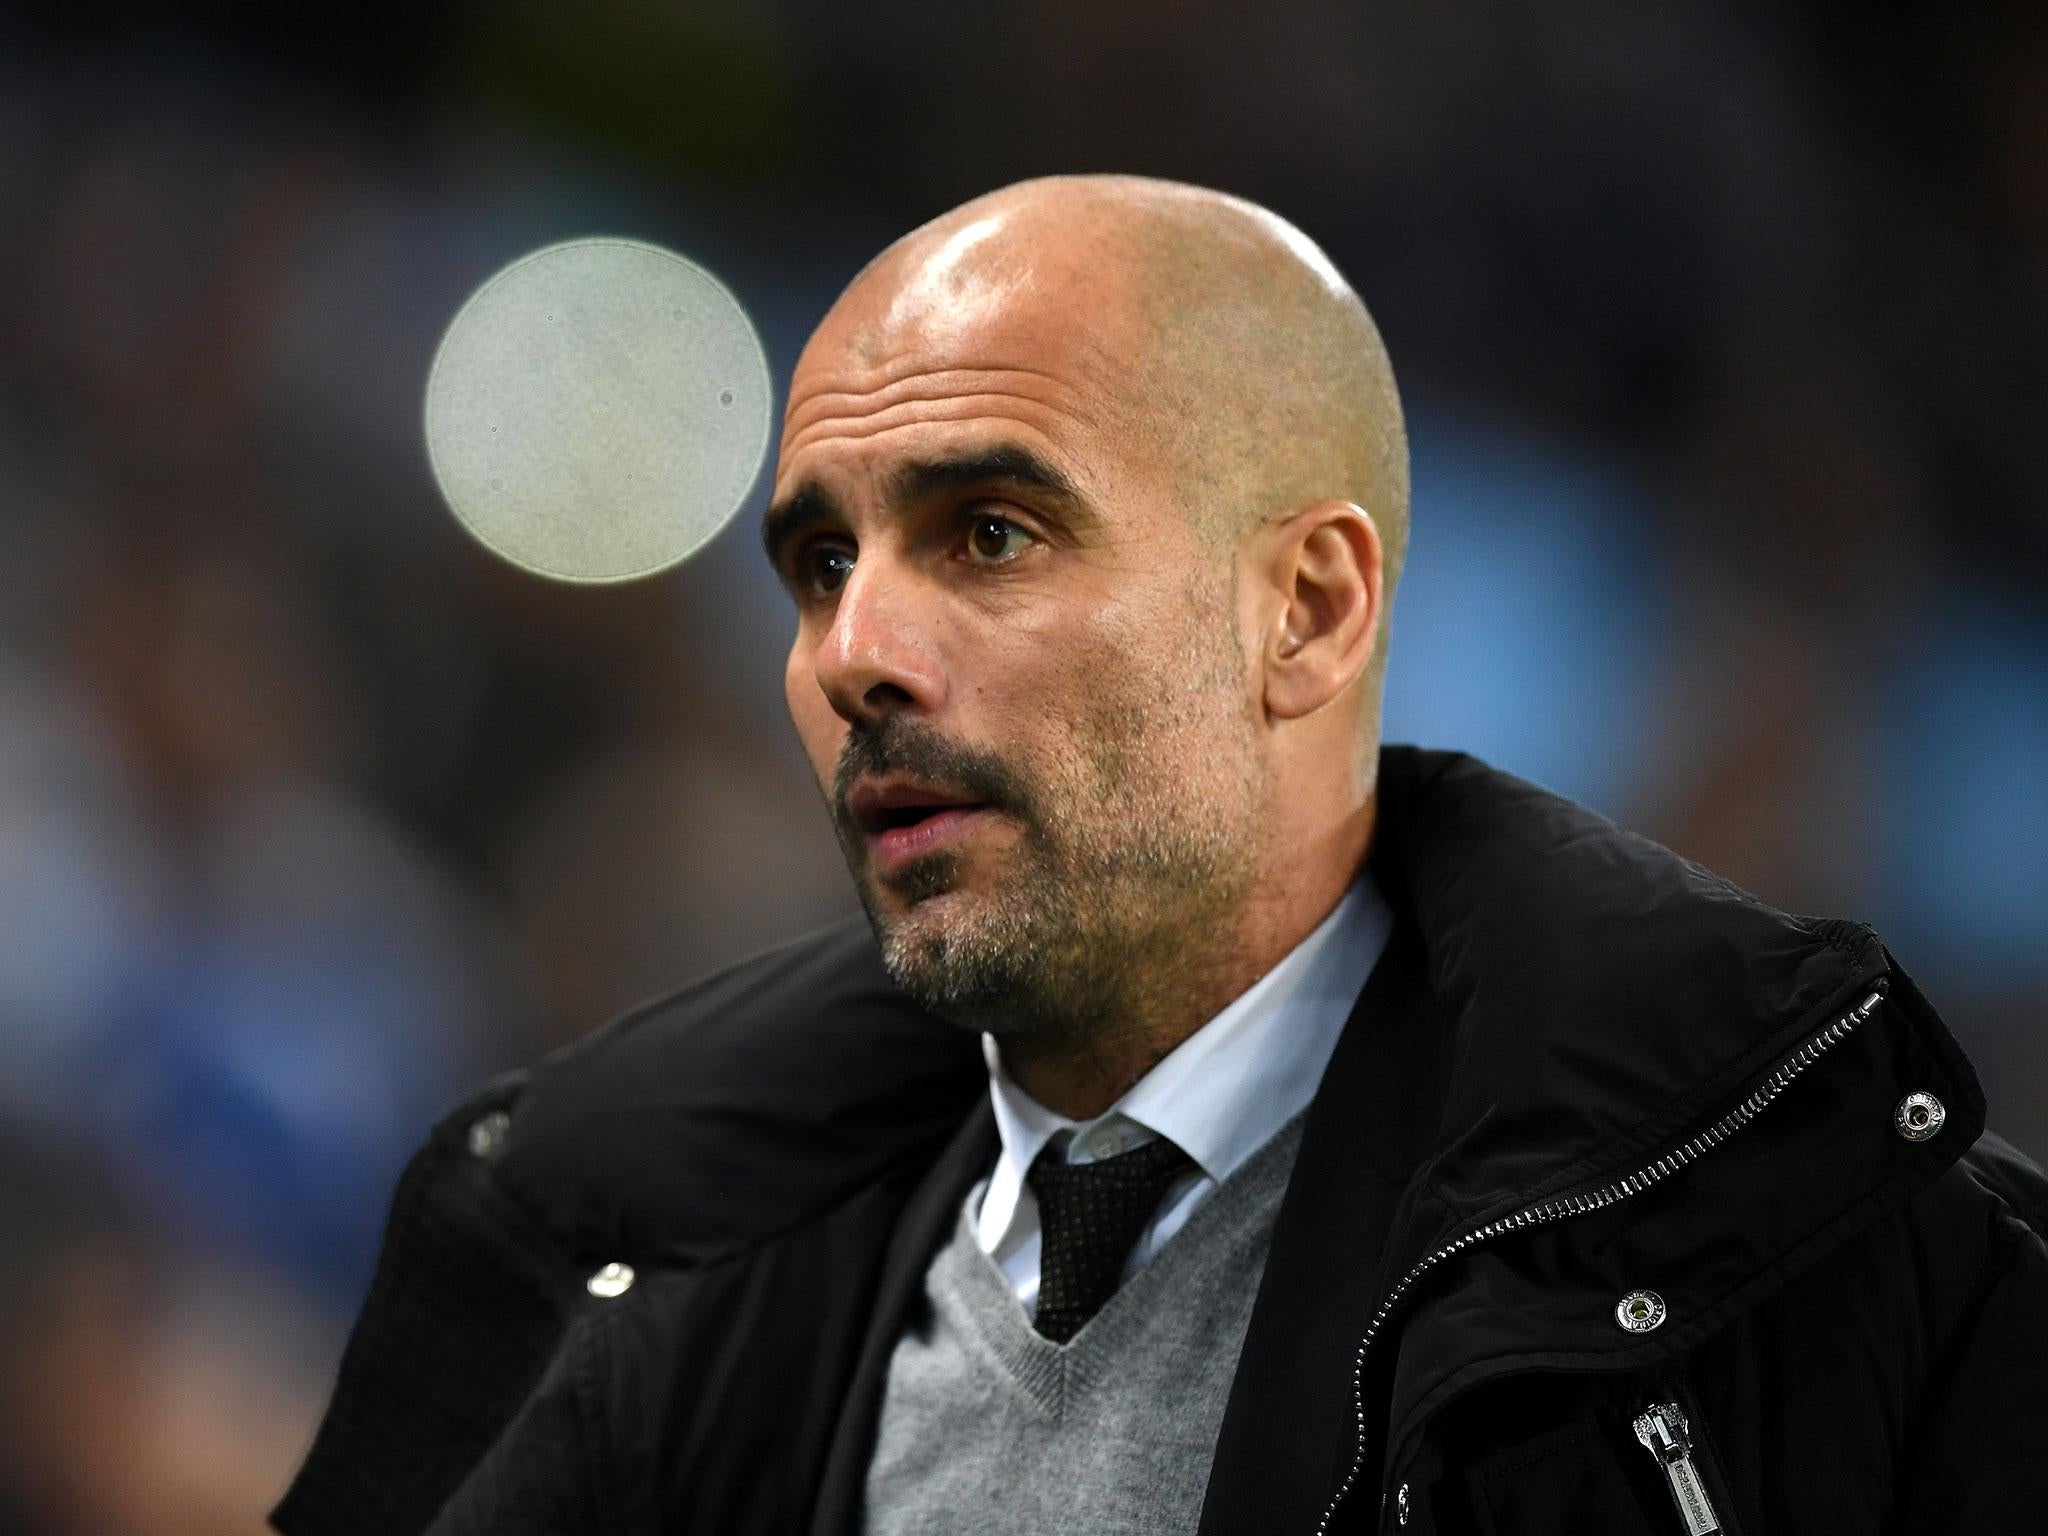 Guardiola said City would continue to take each game one step at a time